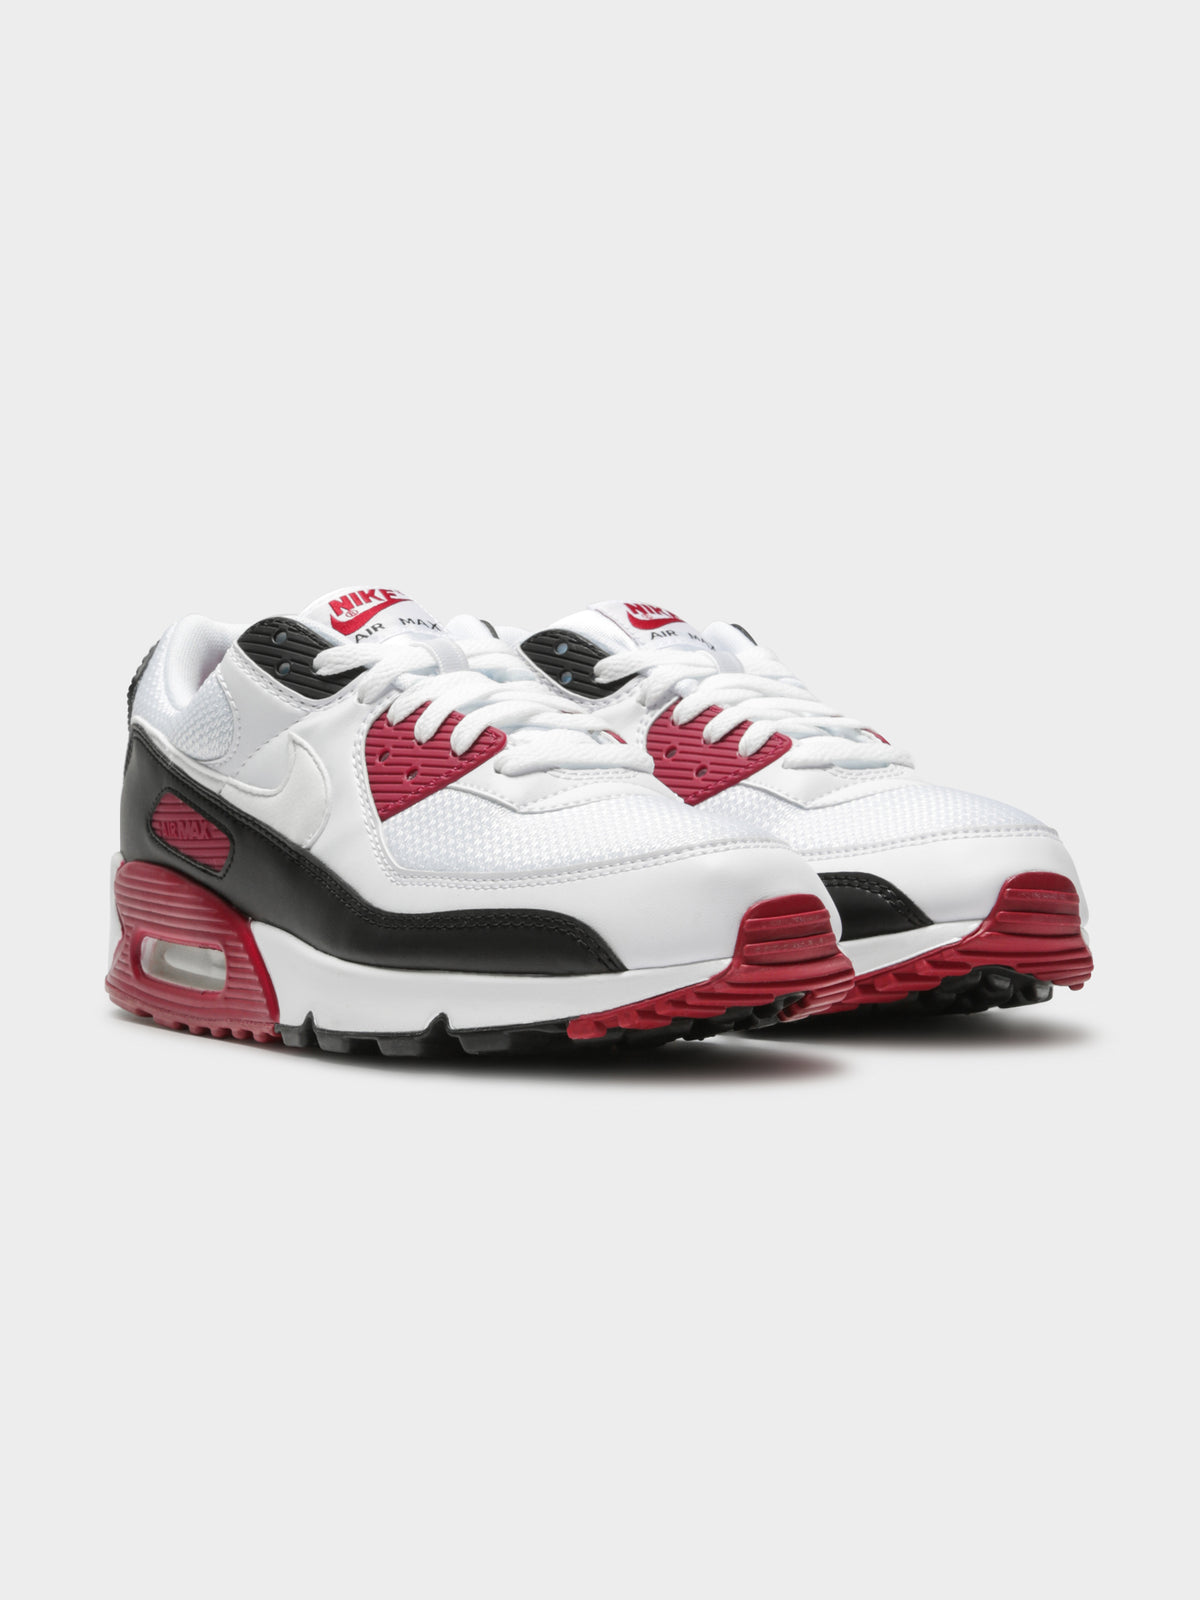 Air Max 90 Sneakers in White &amp; Maroon